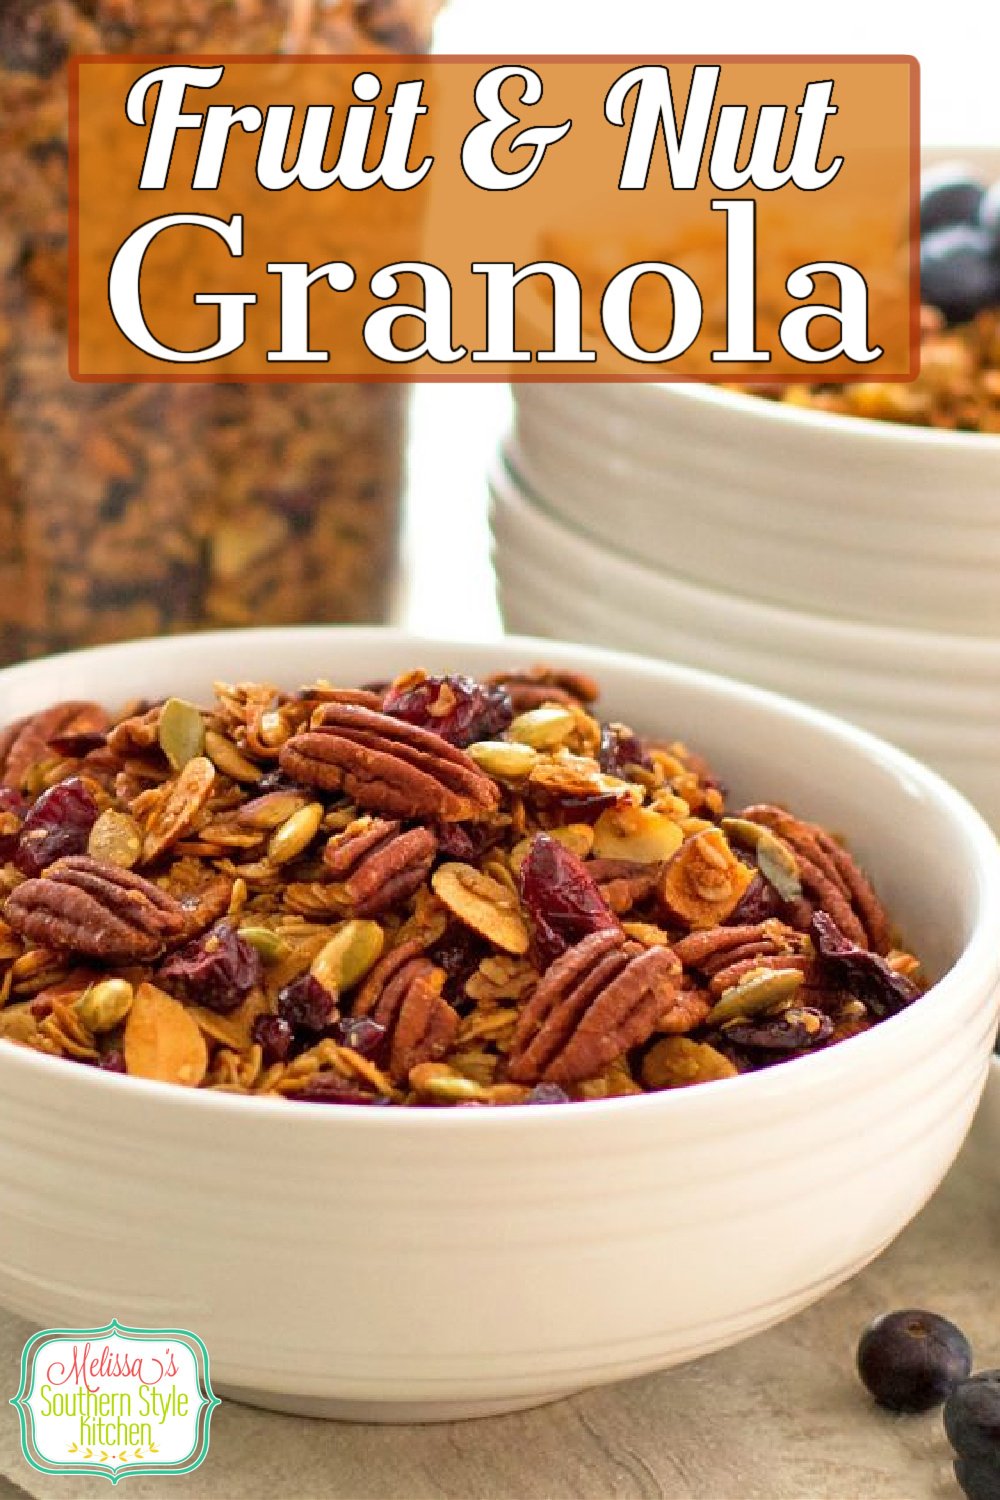 You can personalize this Easy Fruit and Nut Granola using your favorite fruit and nut flavor combination #fruitandnutgranola #granolarecipes #granola #fruit #nits #healthyfood #brunch #snacks #breakfast via @melissasssk